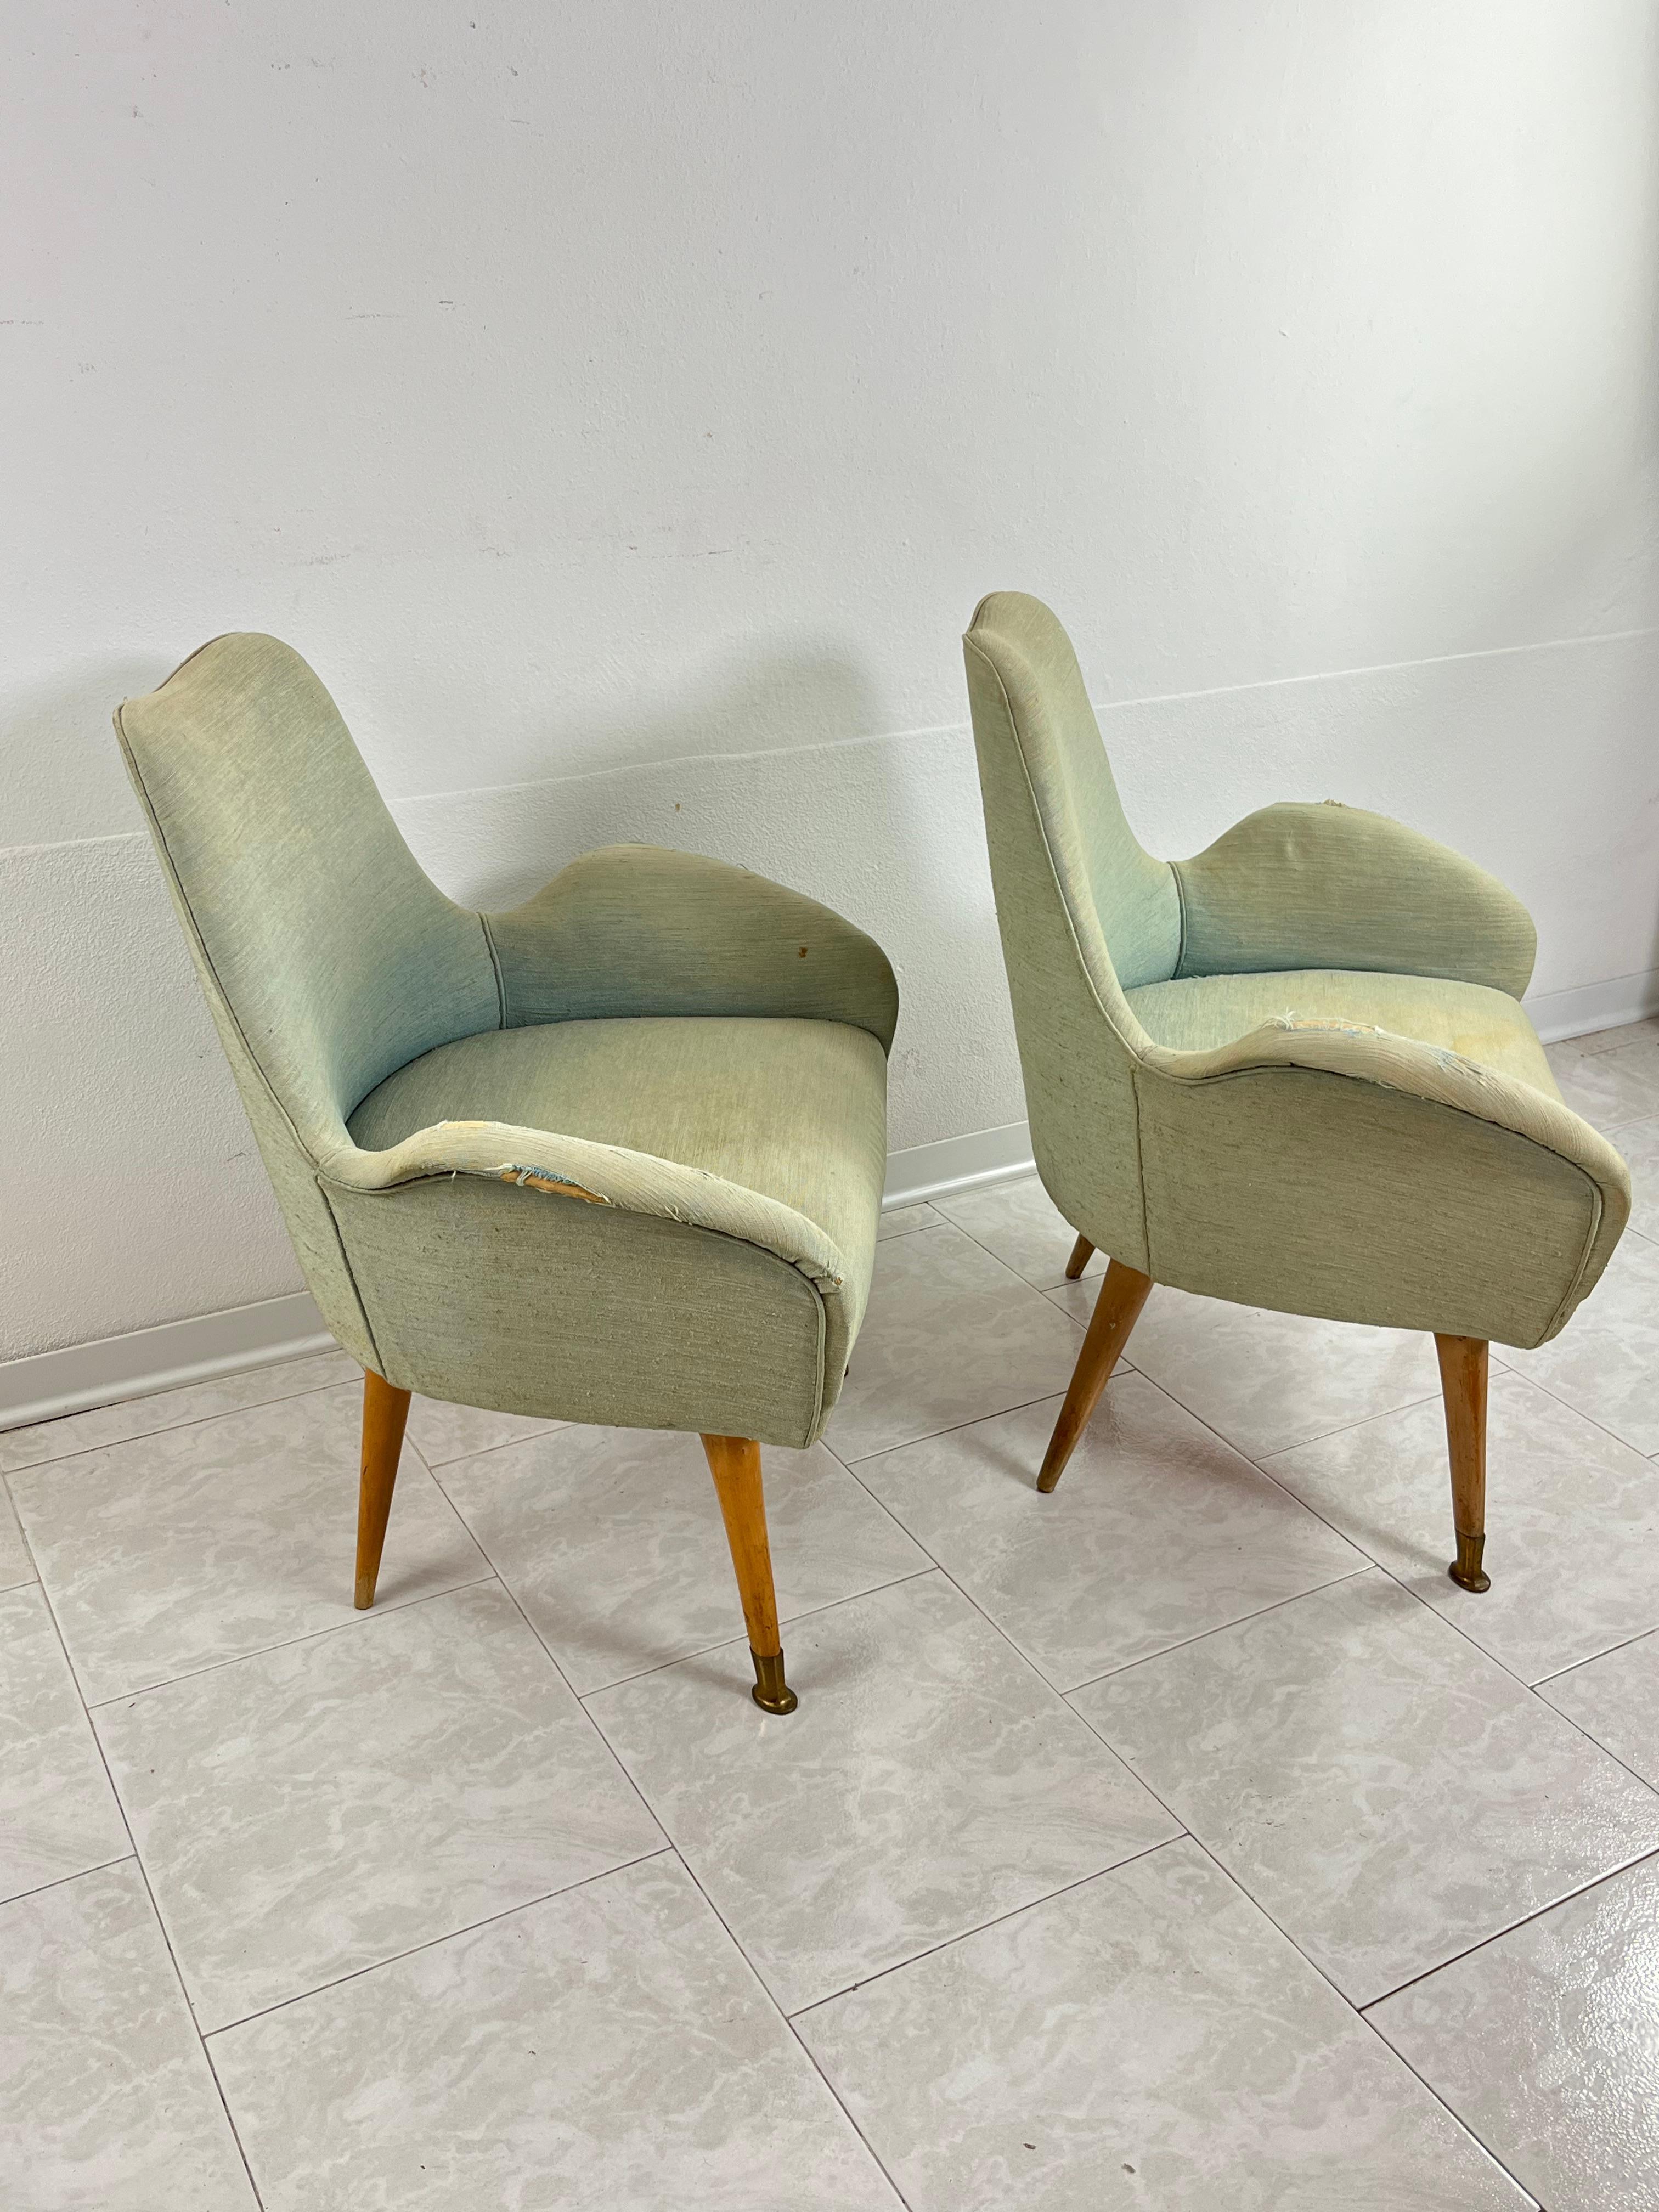 Brass Pair of Mid-Century Armchairs Attributed To Federico Munari 1950s For Sale